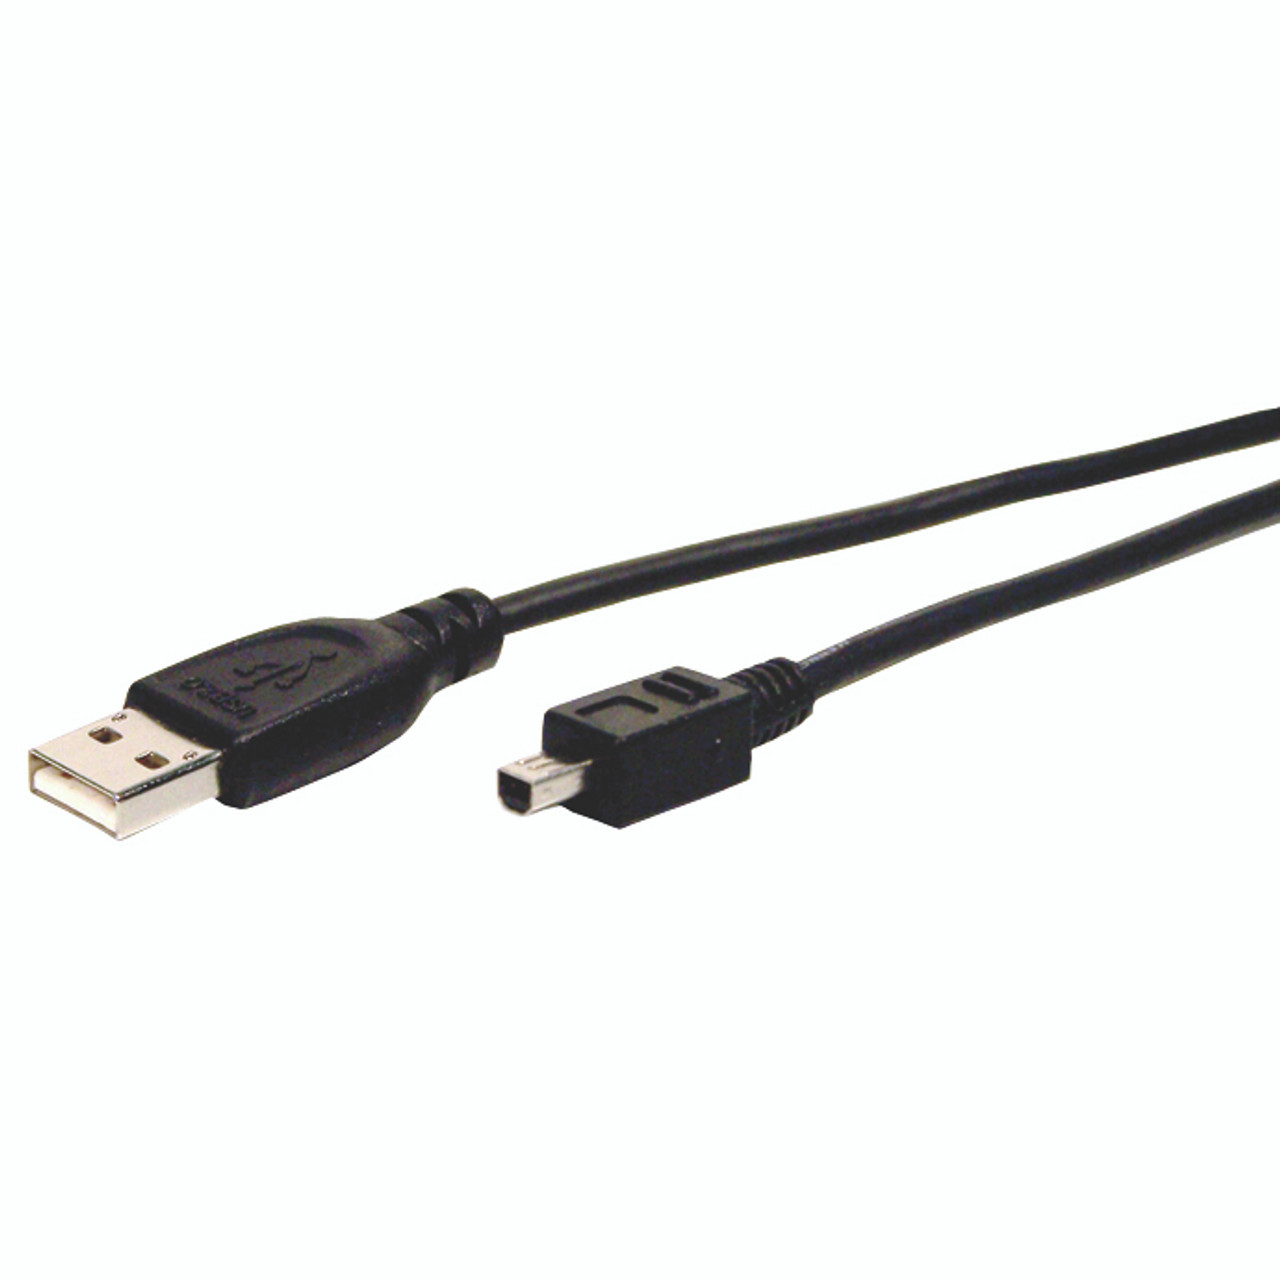 Pearstone USB 2.0 Type-C to USB Type-A Charge & Sync USB-3CMAM6